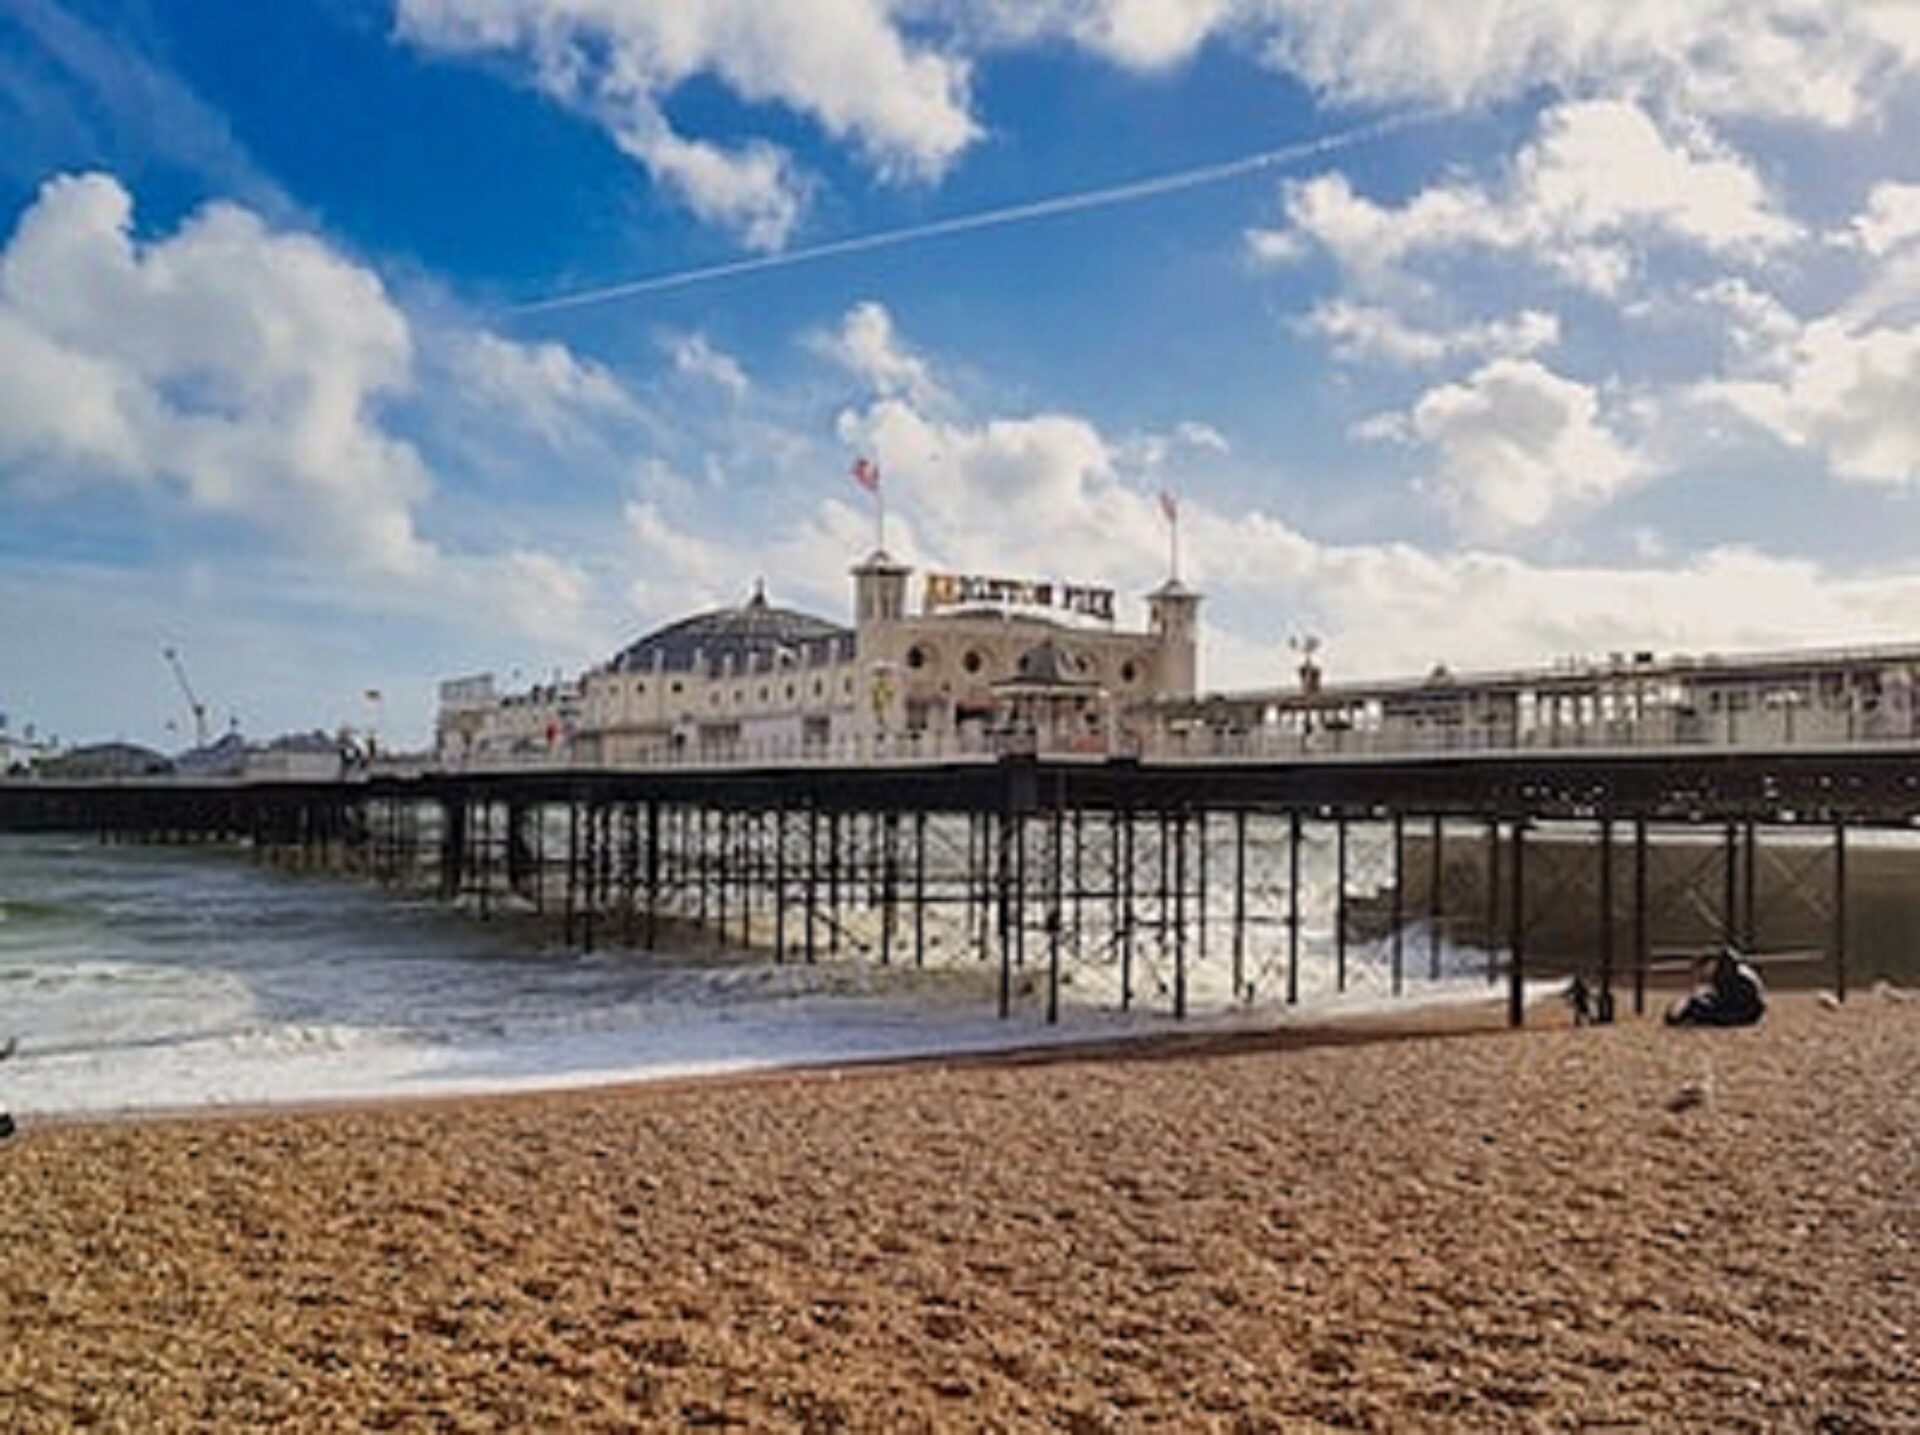 An image of Brighton Palace Pier with blue skies and big white clouds in the background, and pebble beach in the foreground.